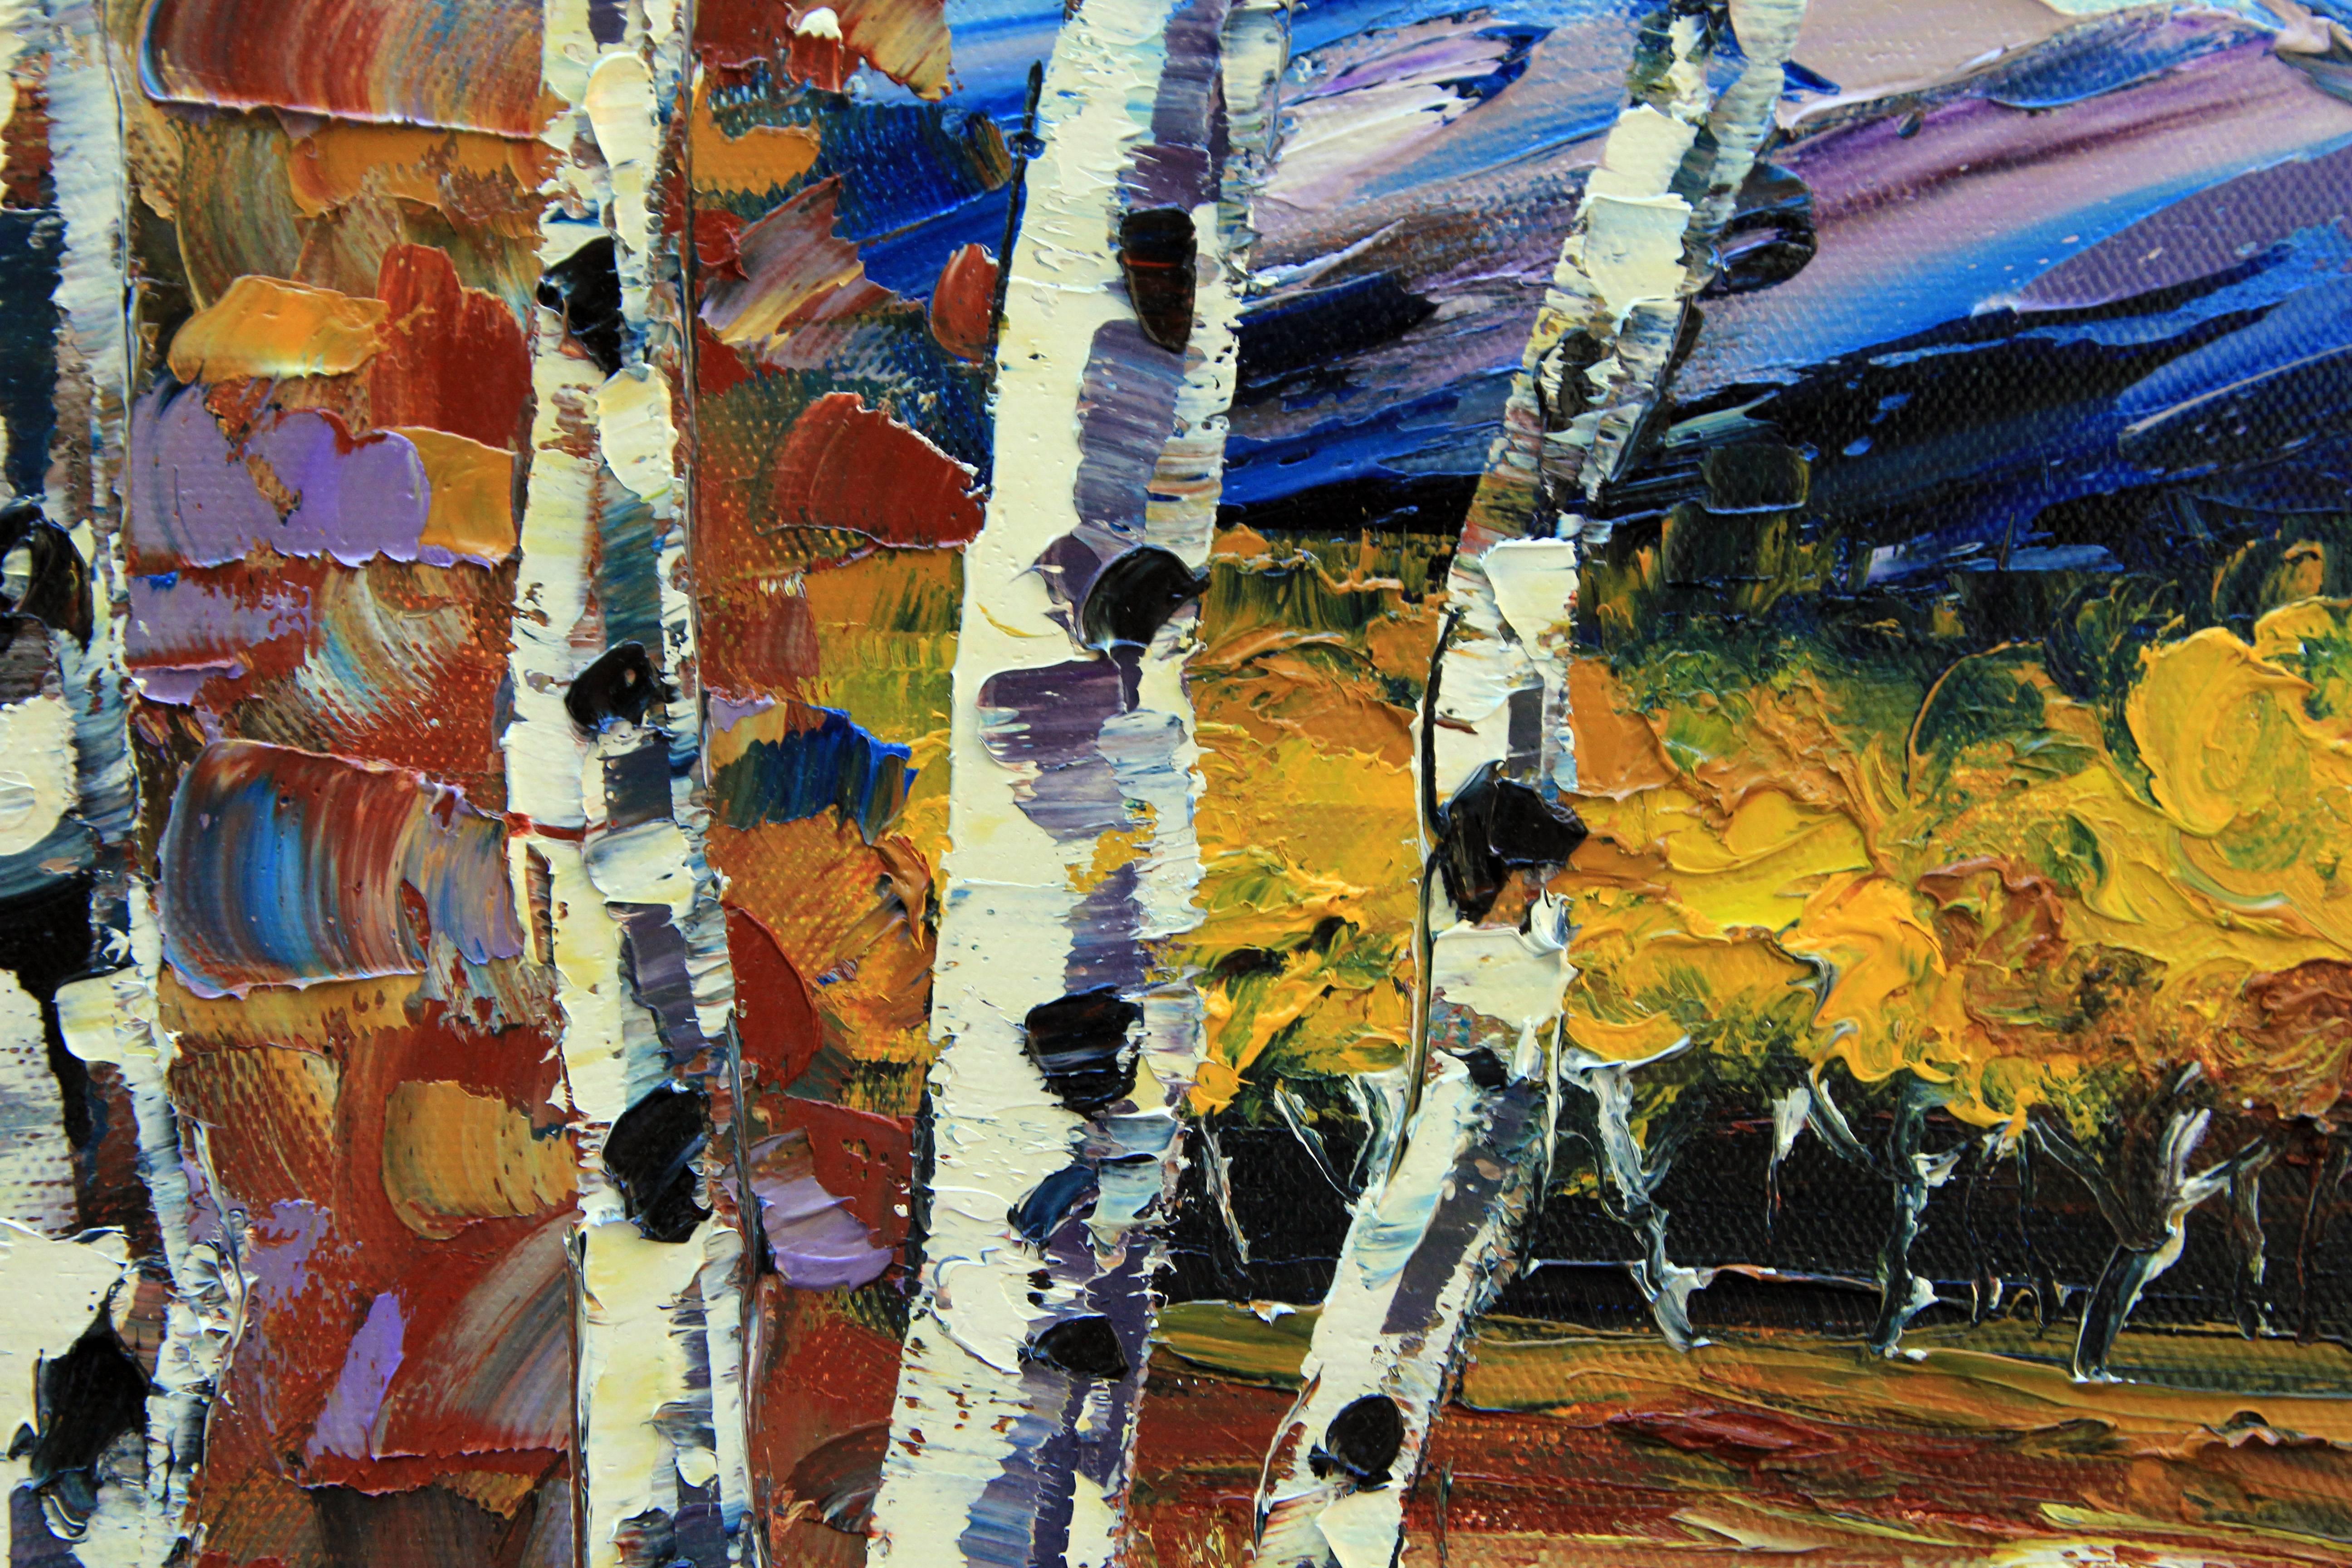 Beautiful Birch Lisa Elley Oil painting on stretched canvas 3